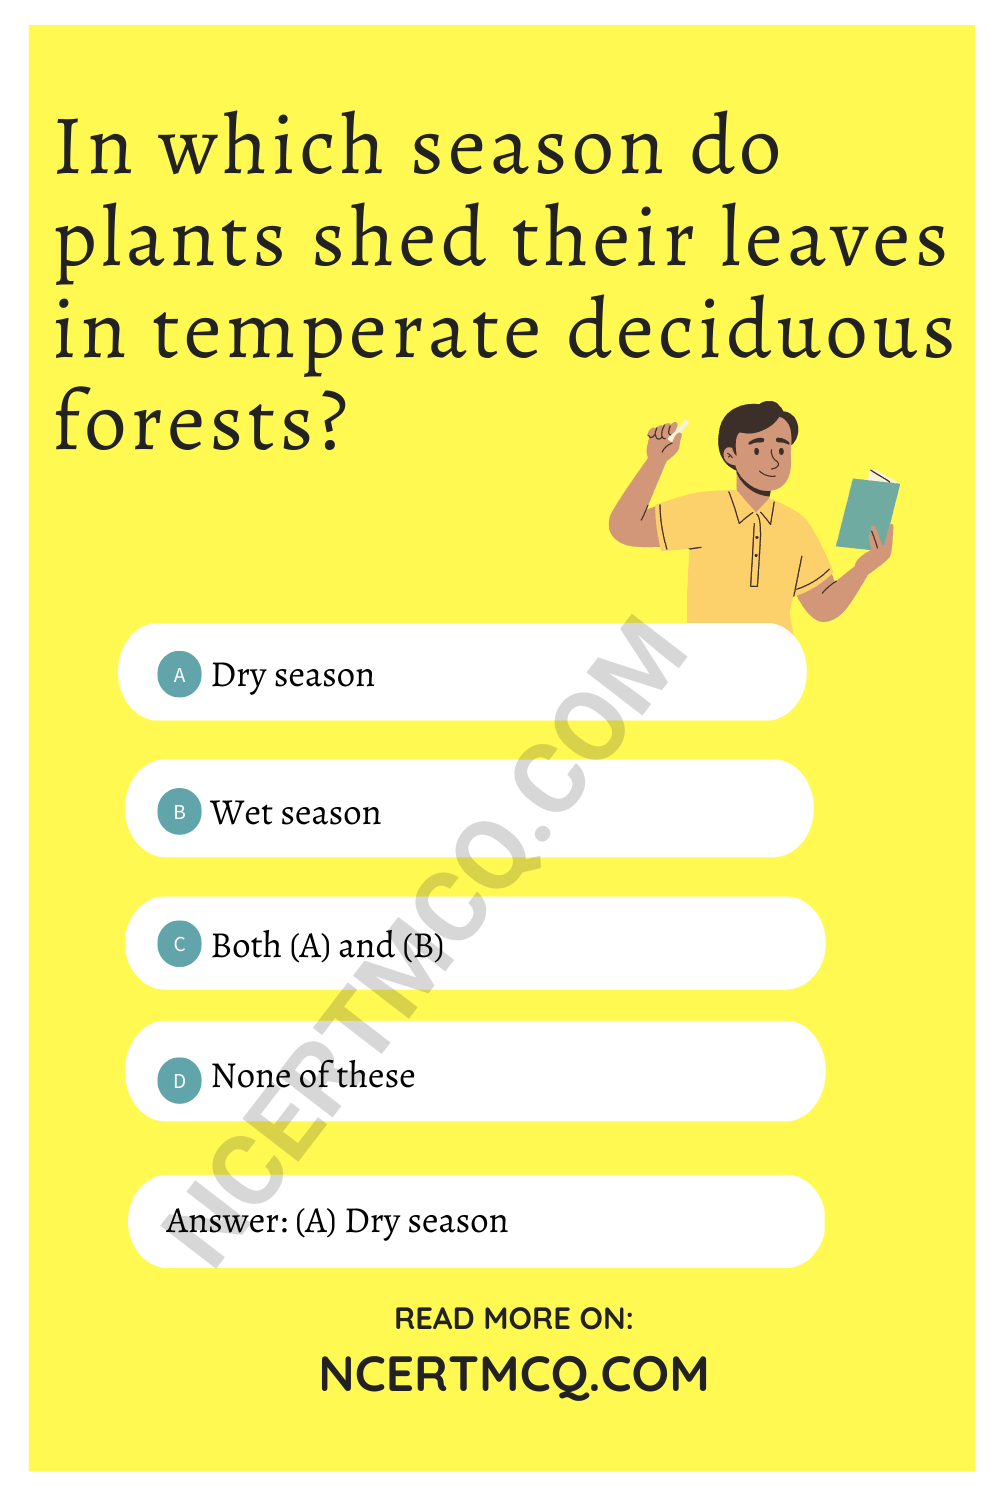 In which season do plants shed their leaves in temperate deciduous forests?